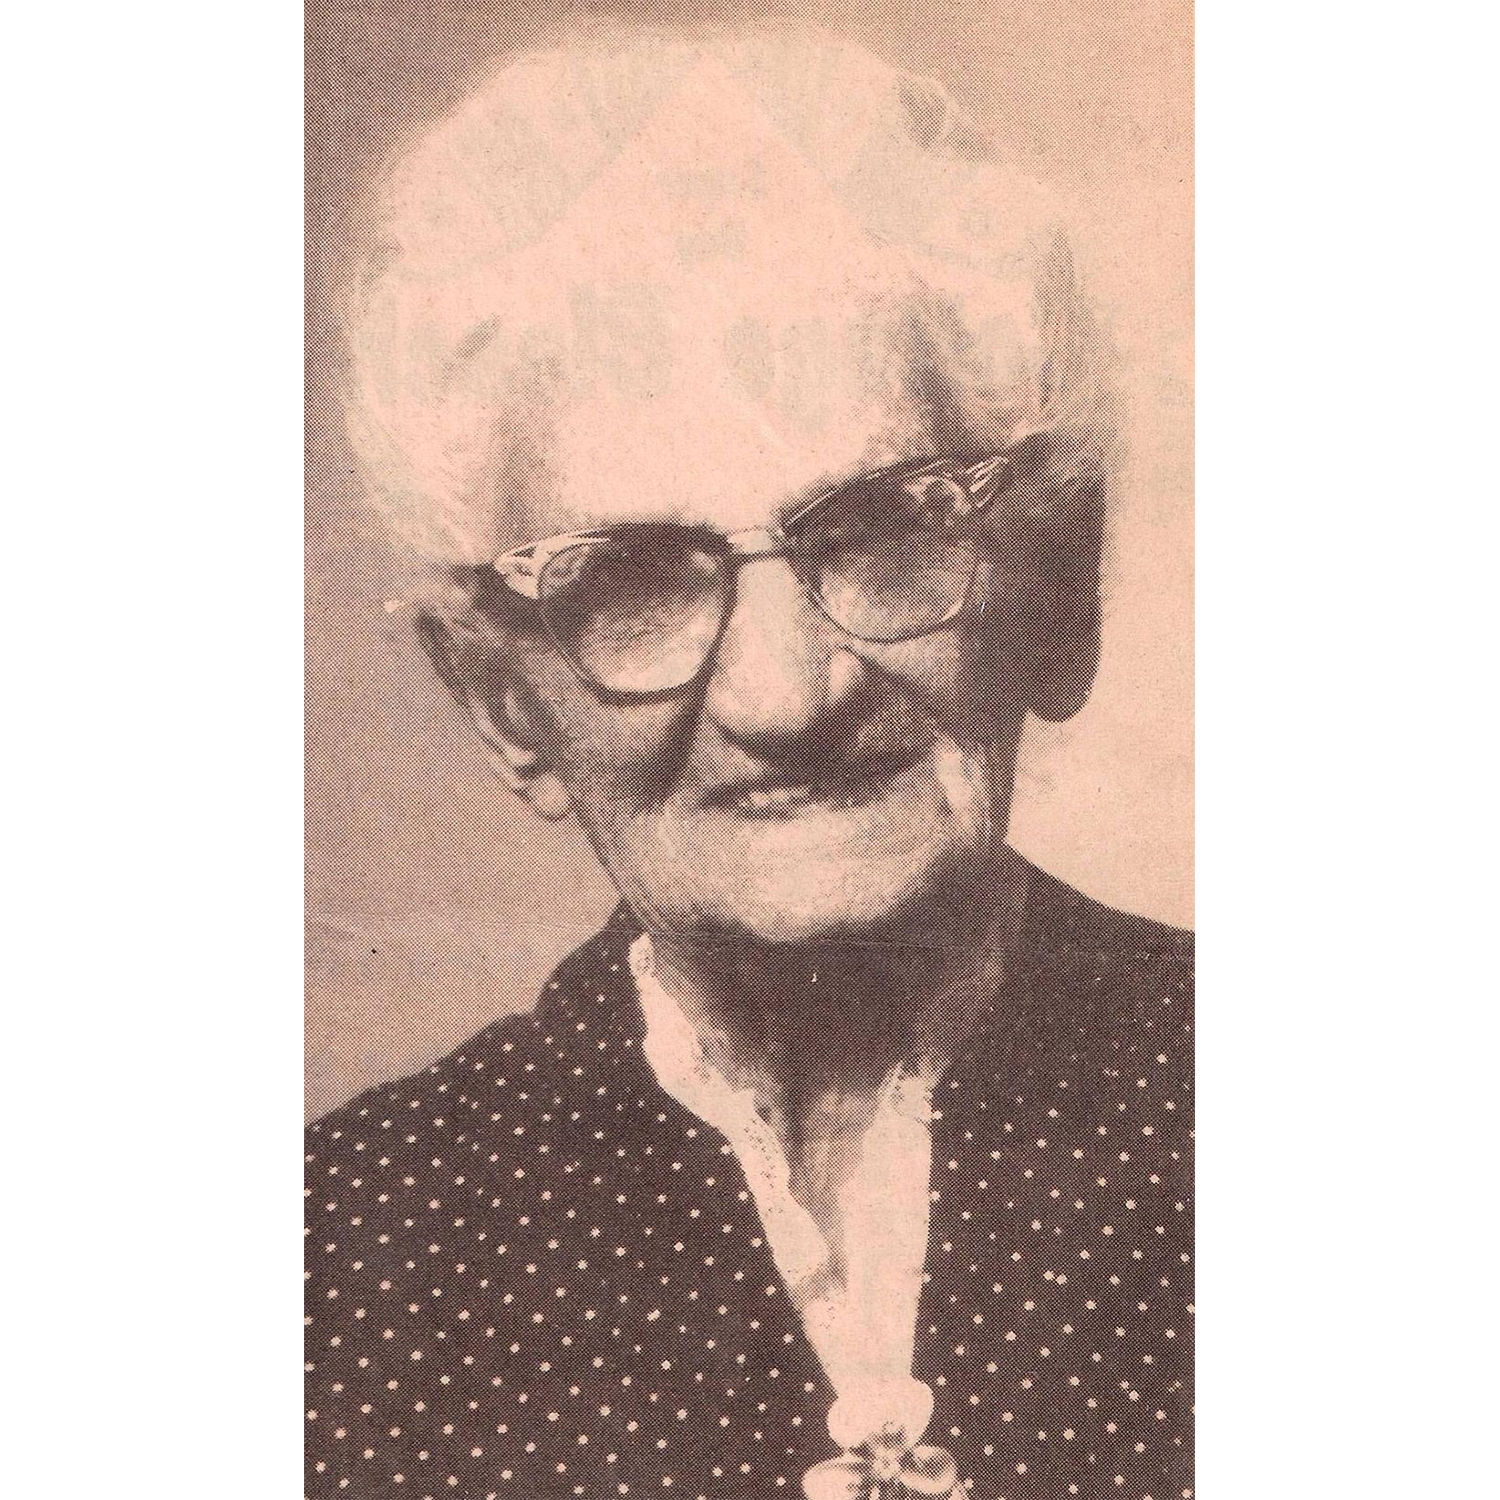 In 1983, aged 107/8. (Source: unknown newspaper)